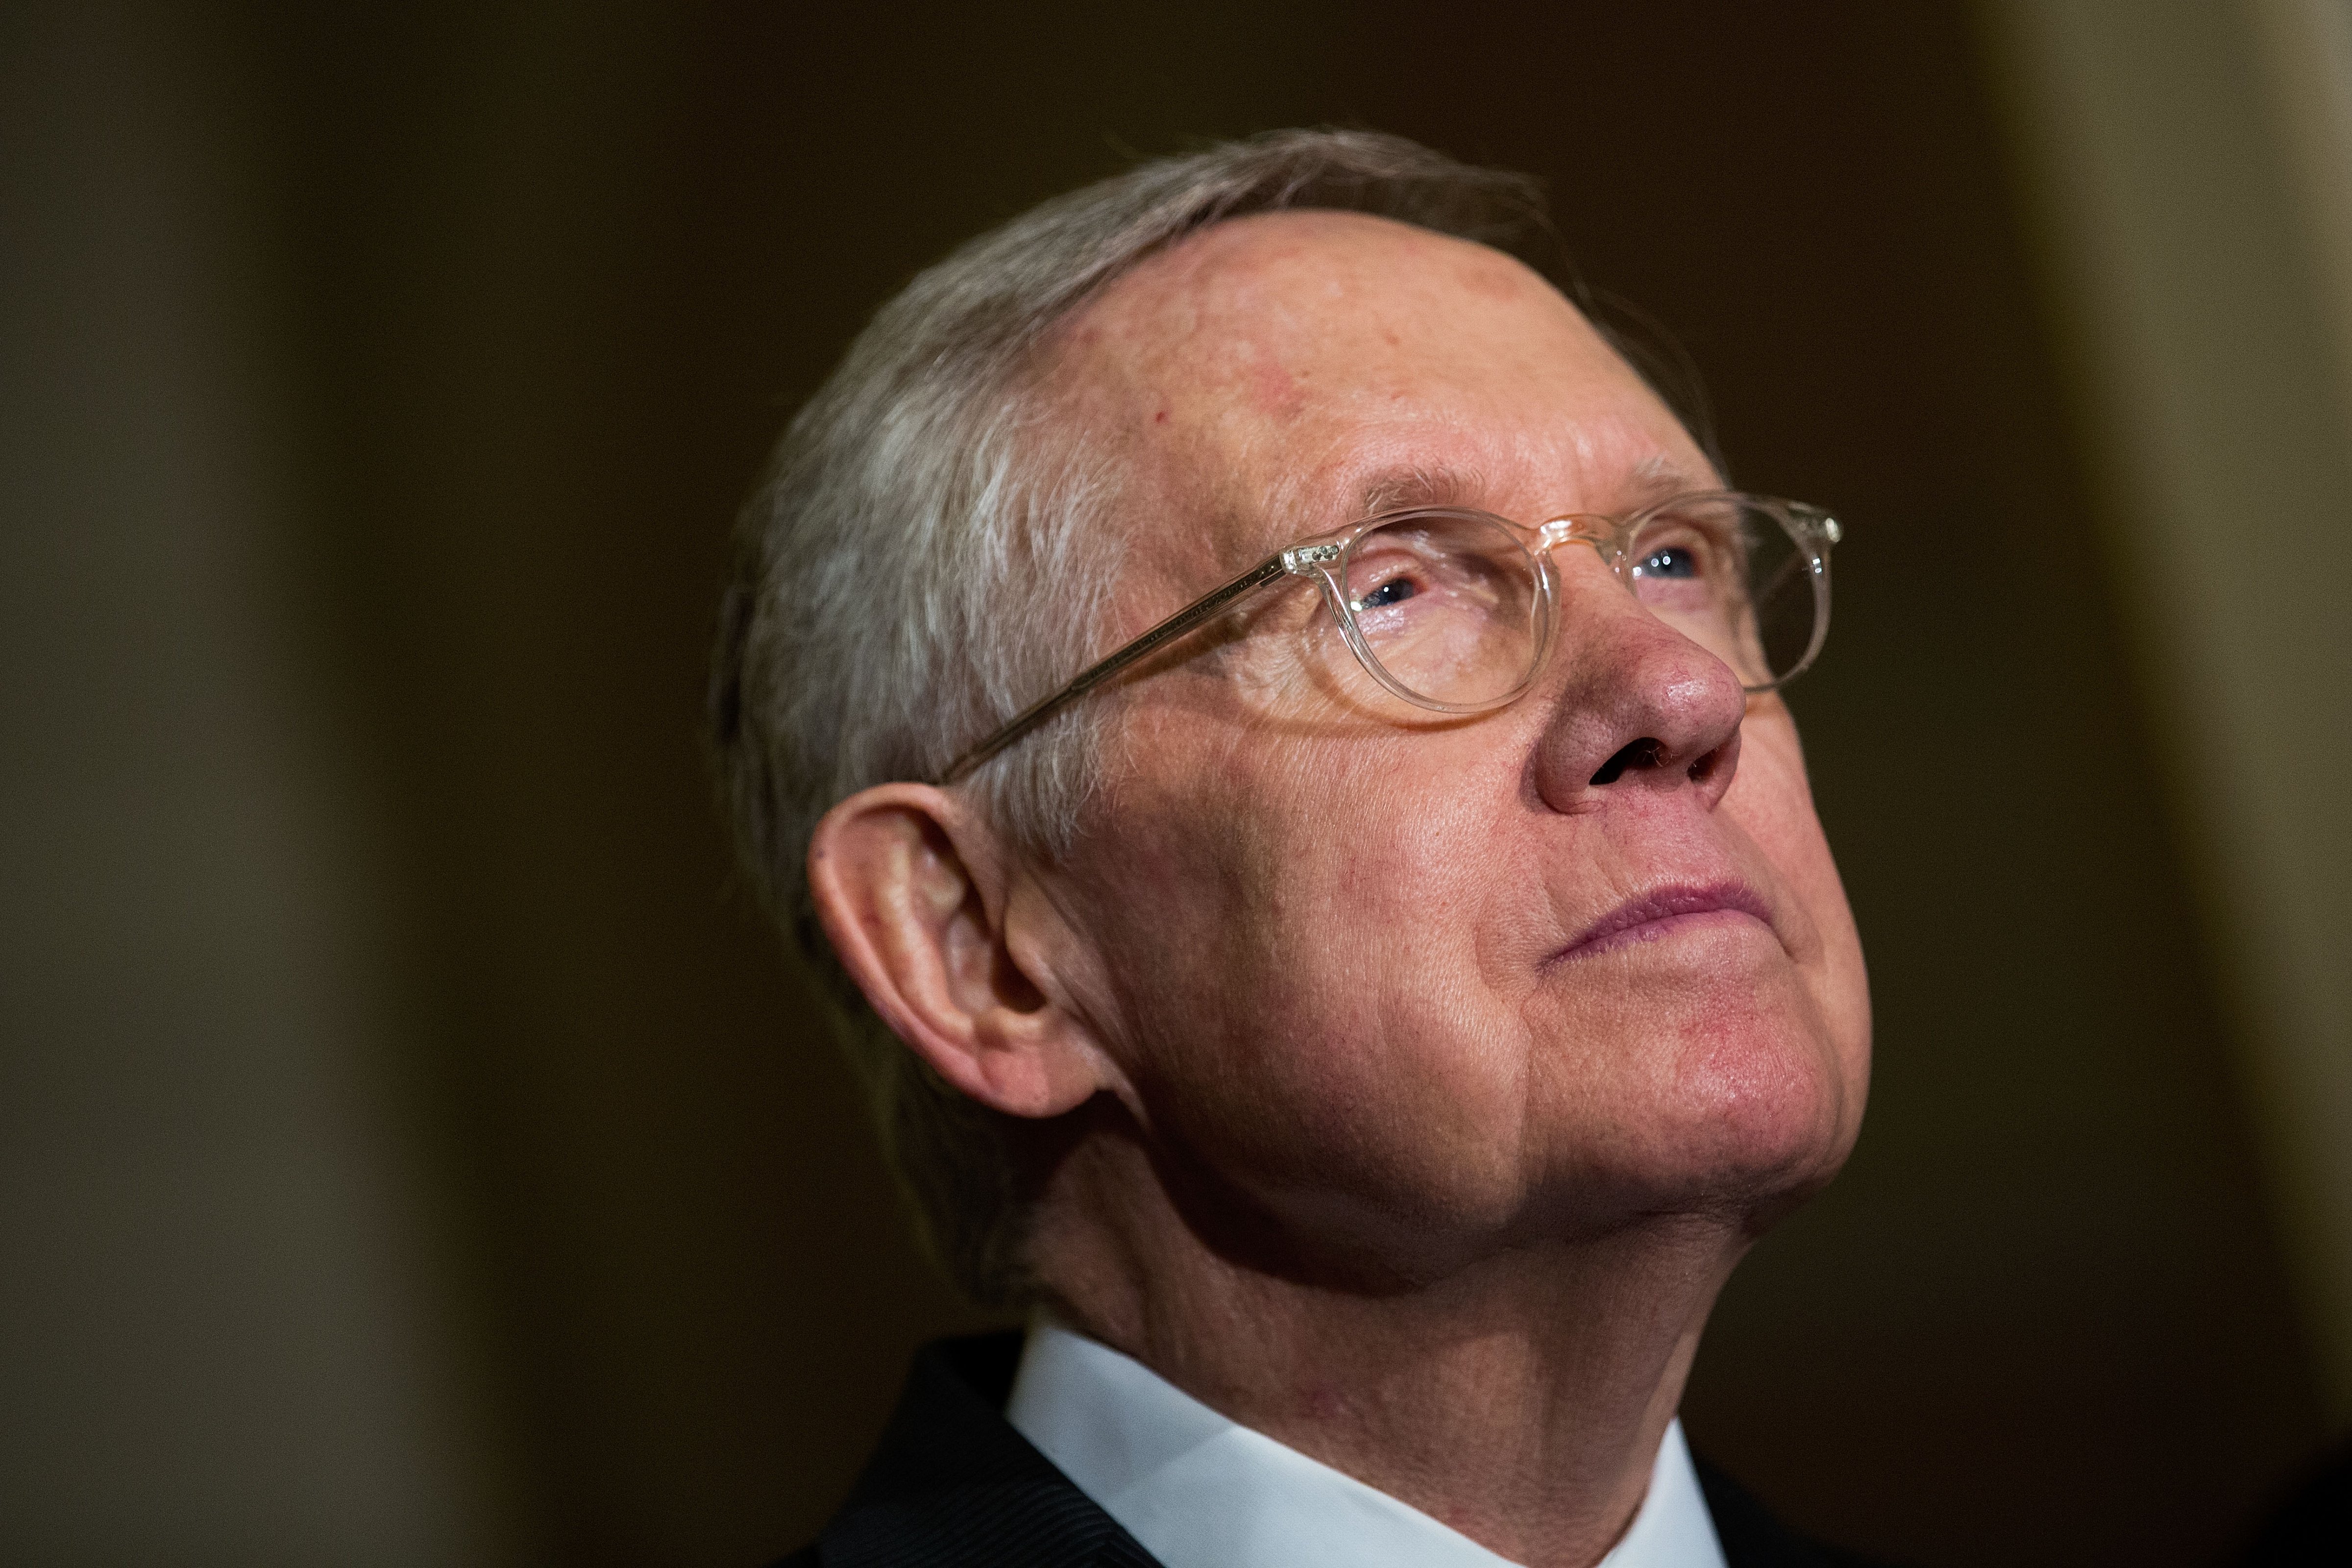 Senate Minority Leader Harry Reid (D-NV) listens to questions from reporters during a news conference after their weekly policy meeting with Senate Republicans, at the U.S. Capitol, May 10, 2016, in Washington, DC. (Drew Angerer&mdash;Getty Images)